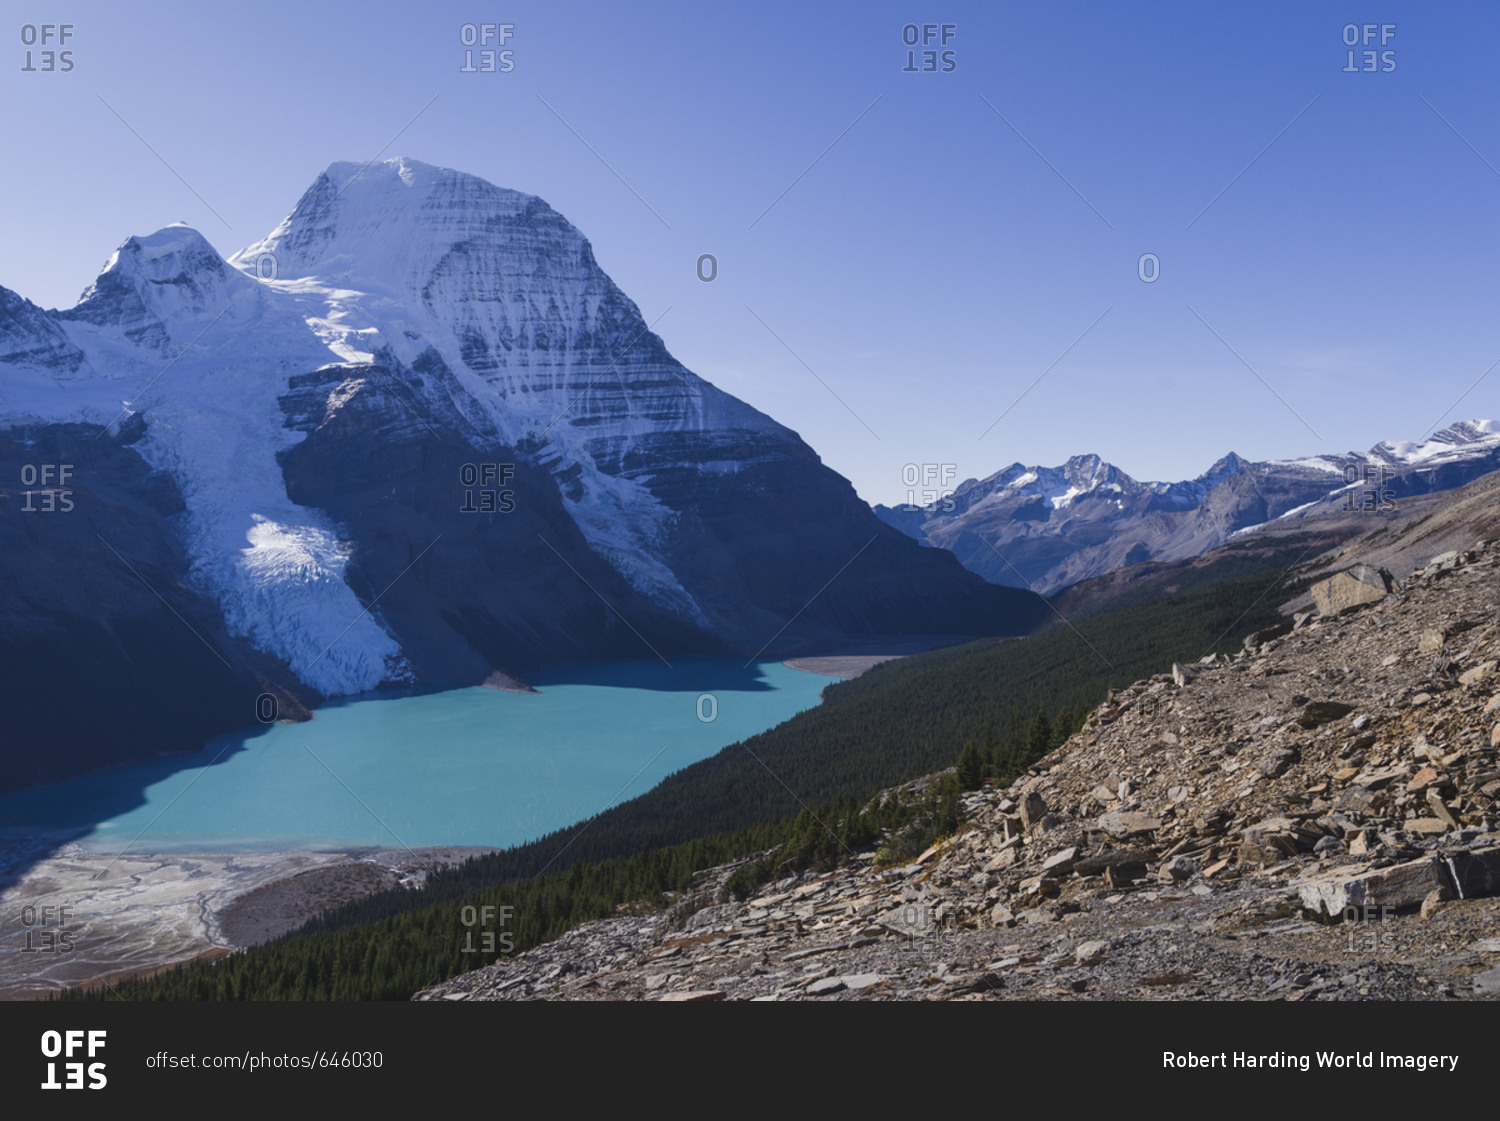 The highest peak of the Canadian Rockies, Mount Robson, and the Berg Lake viewed from the Mumm Basin trail, UNESCO World Heritage Site, Canadian Rockies, British Columbia, Canada, North America